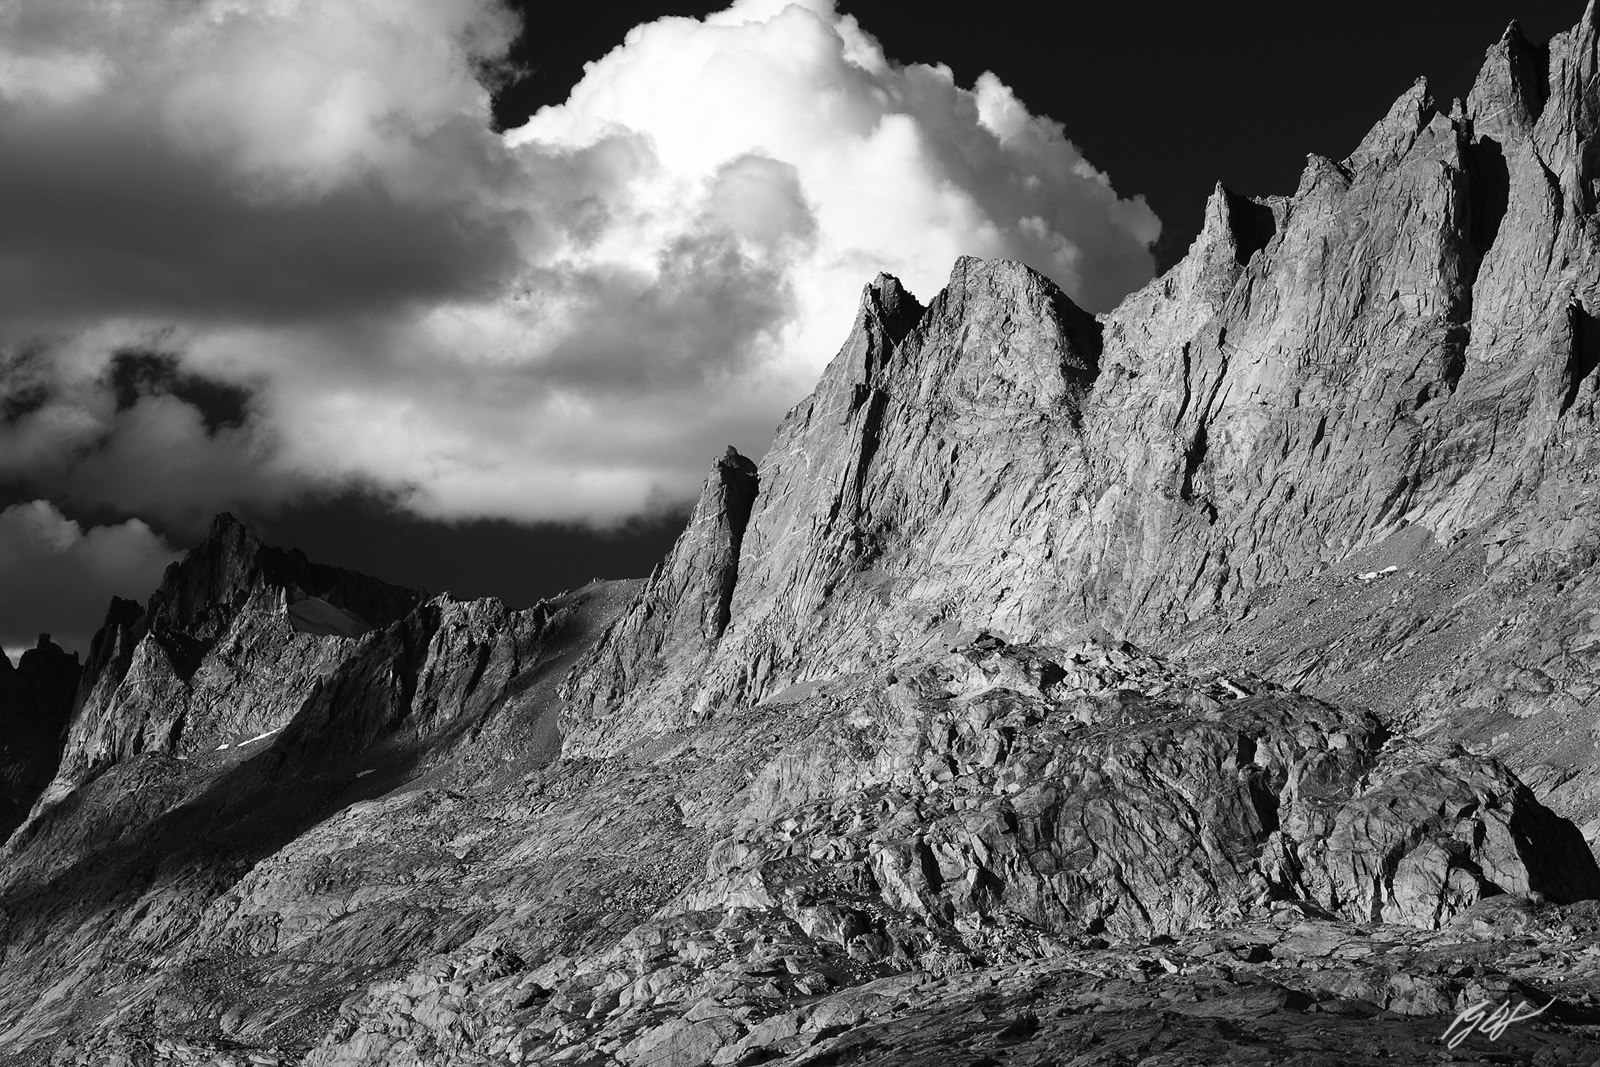 Clouds and Peak in the Titcomb Lakes Basin in the Bridger Wilderness, Wind River Range in Wyoming